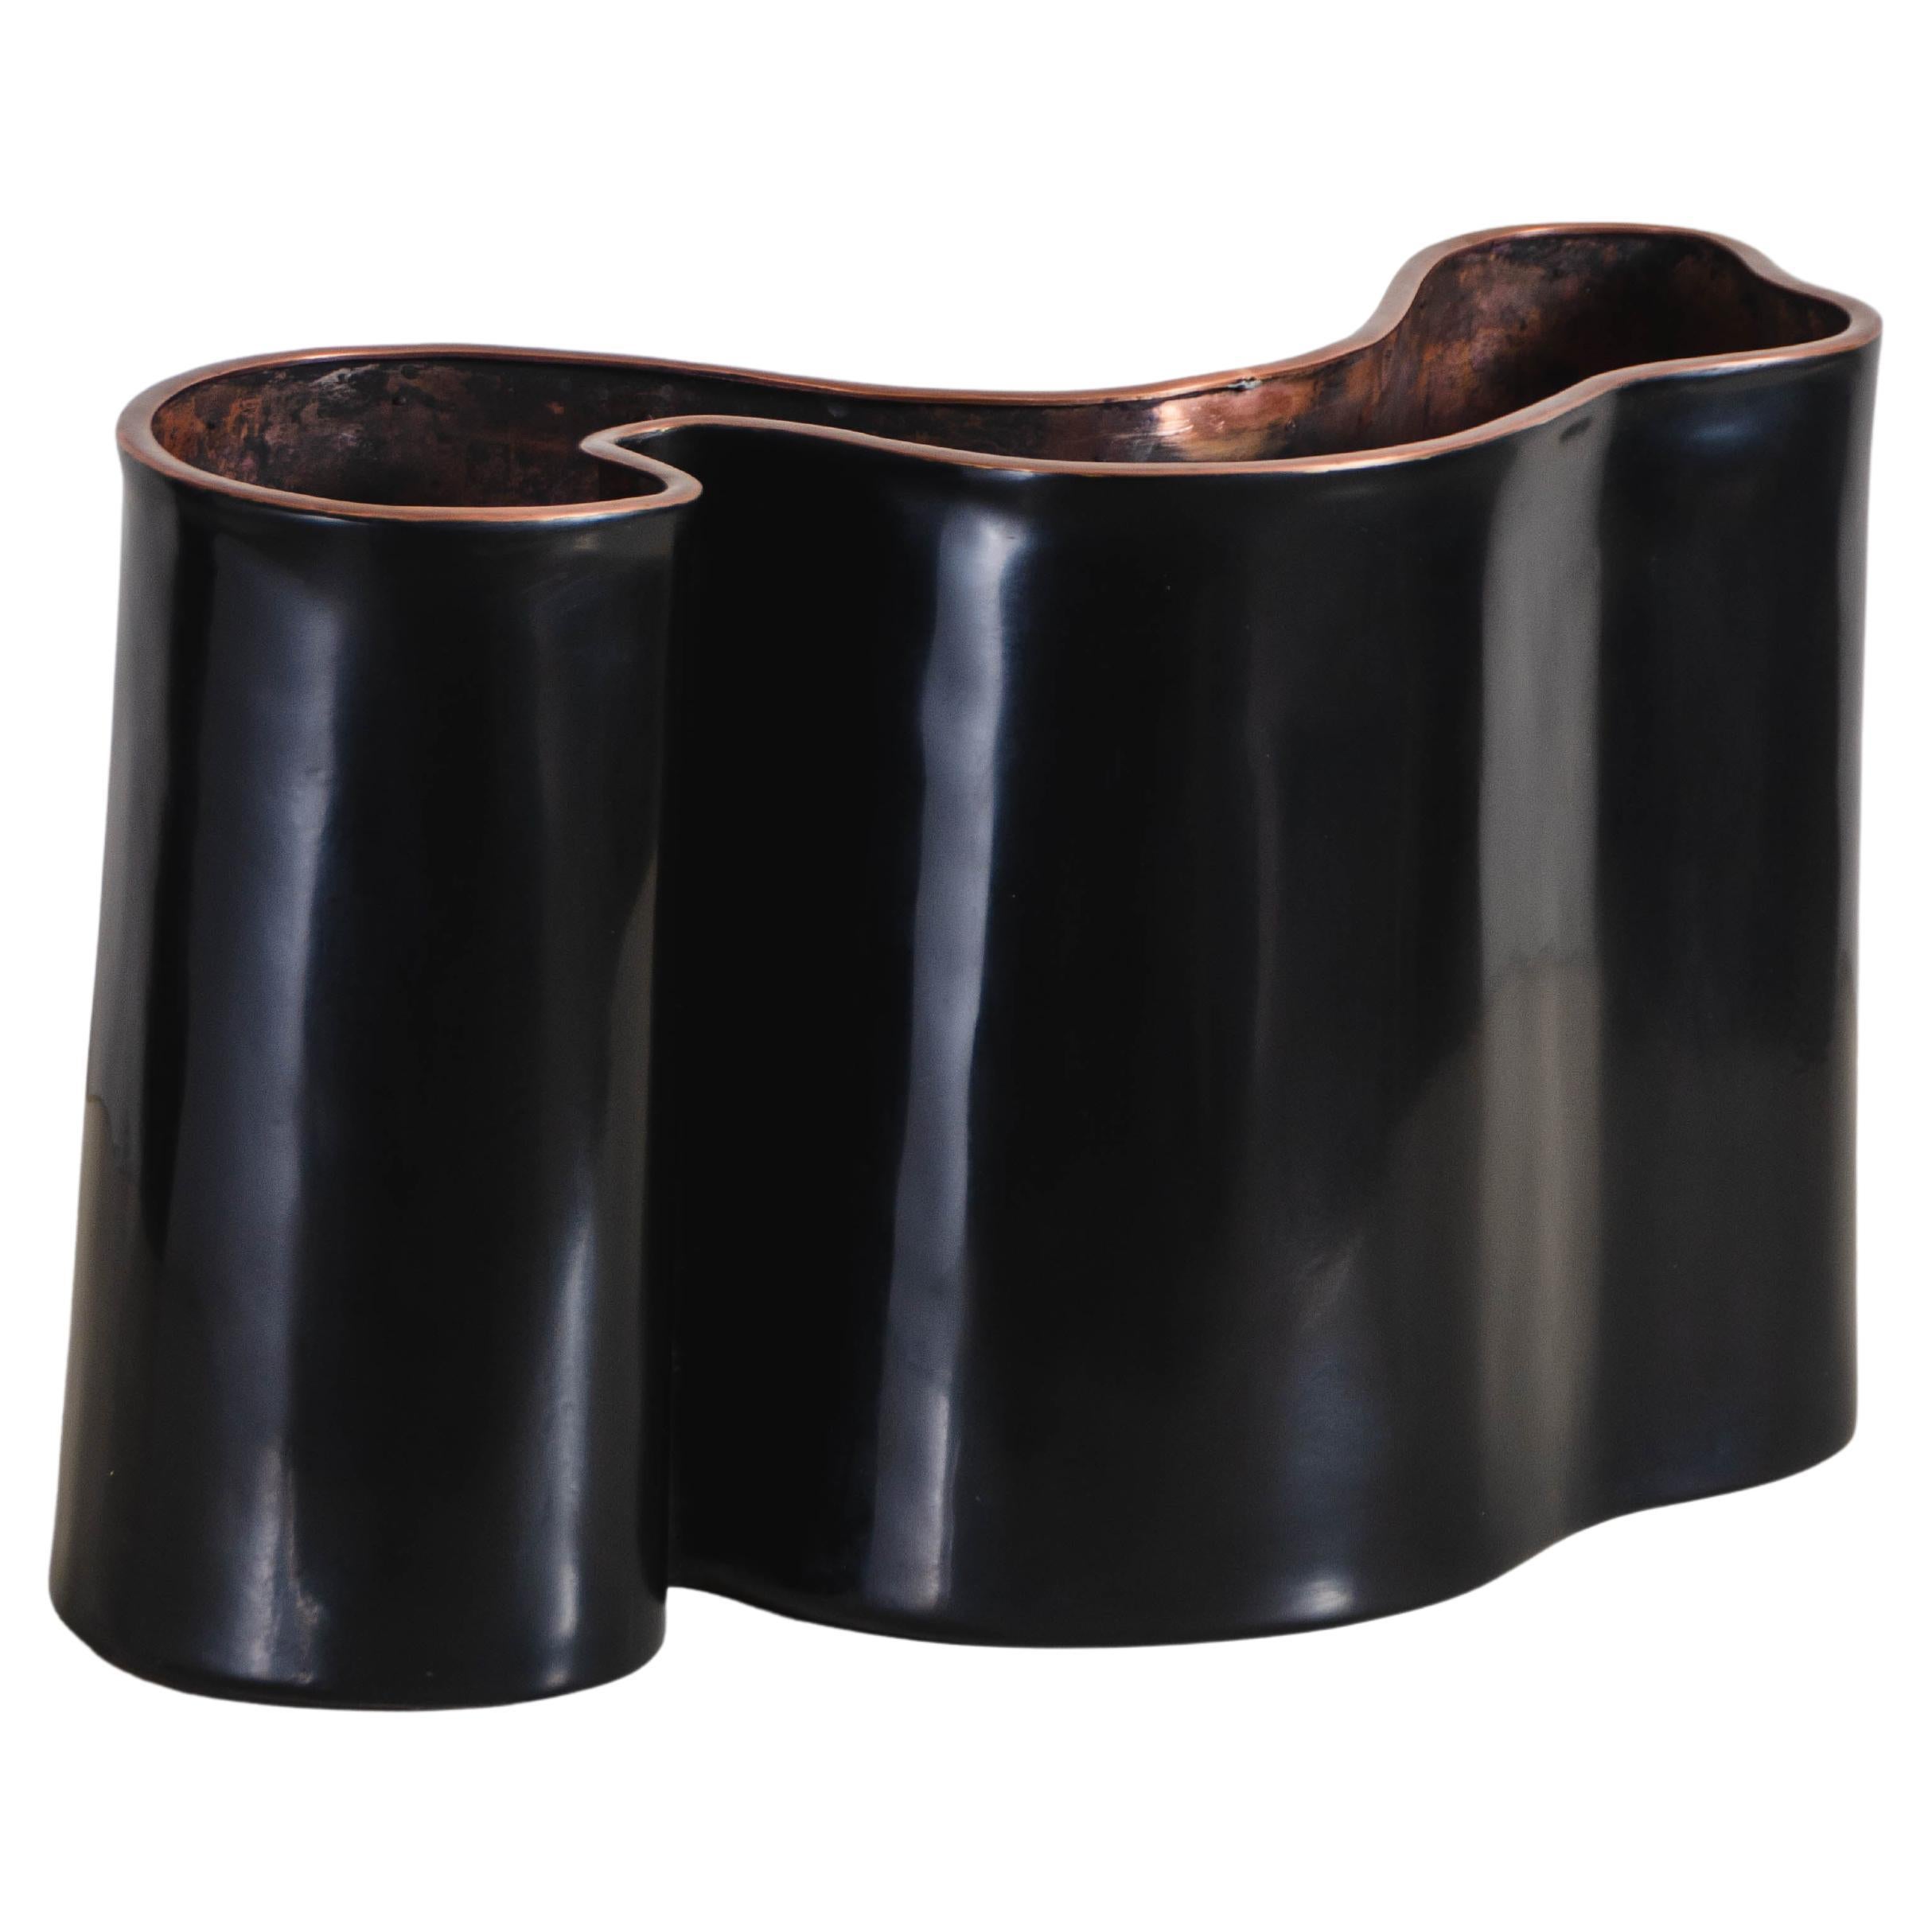 Contemporary Black Lacquer Root Vase w/ Copper Trim by Robert Kuo